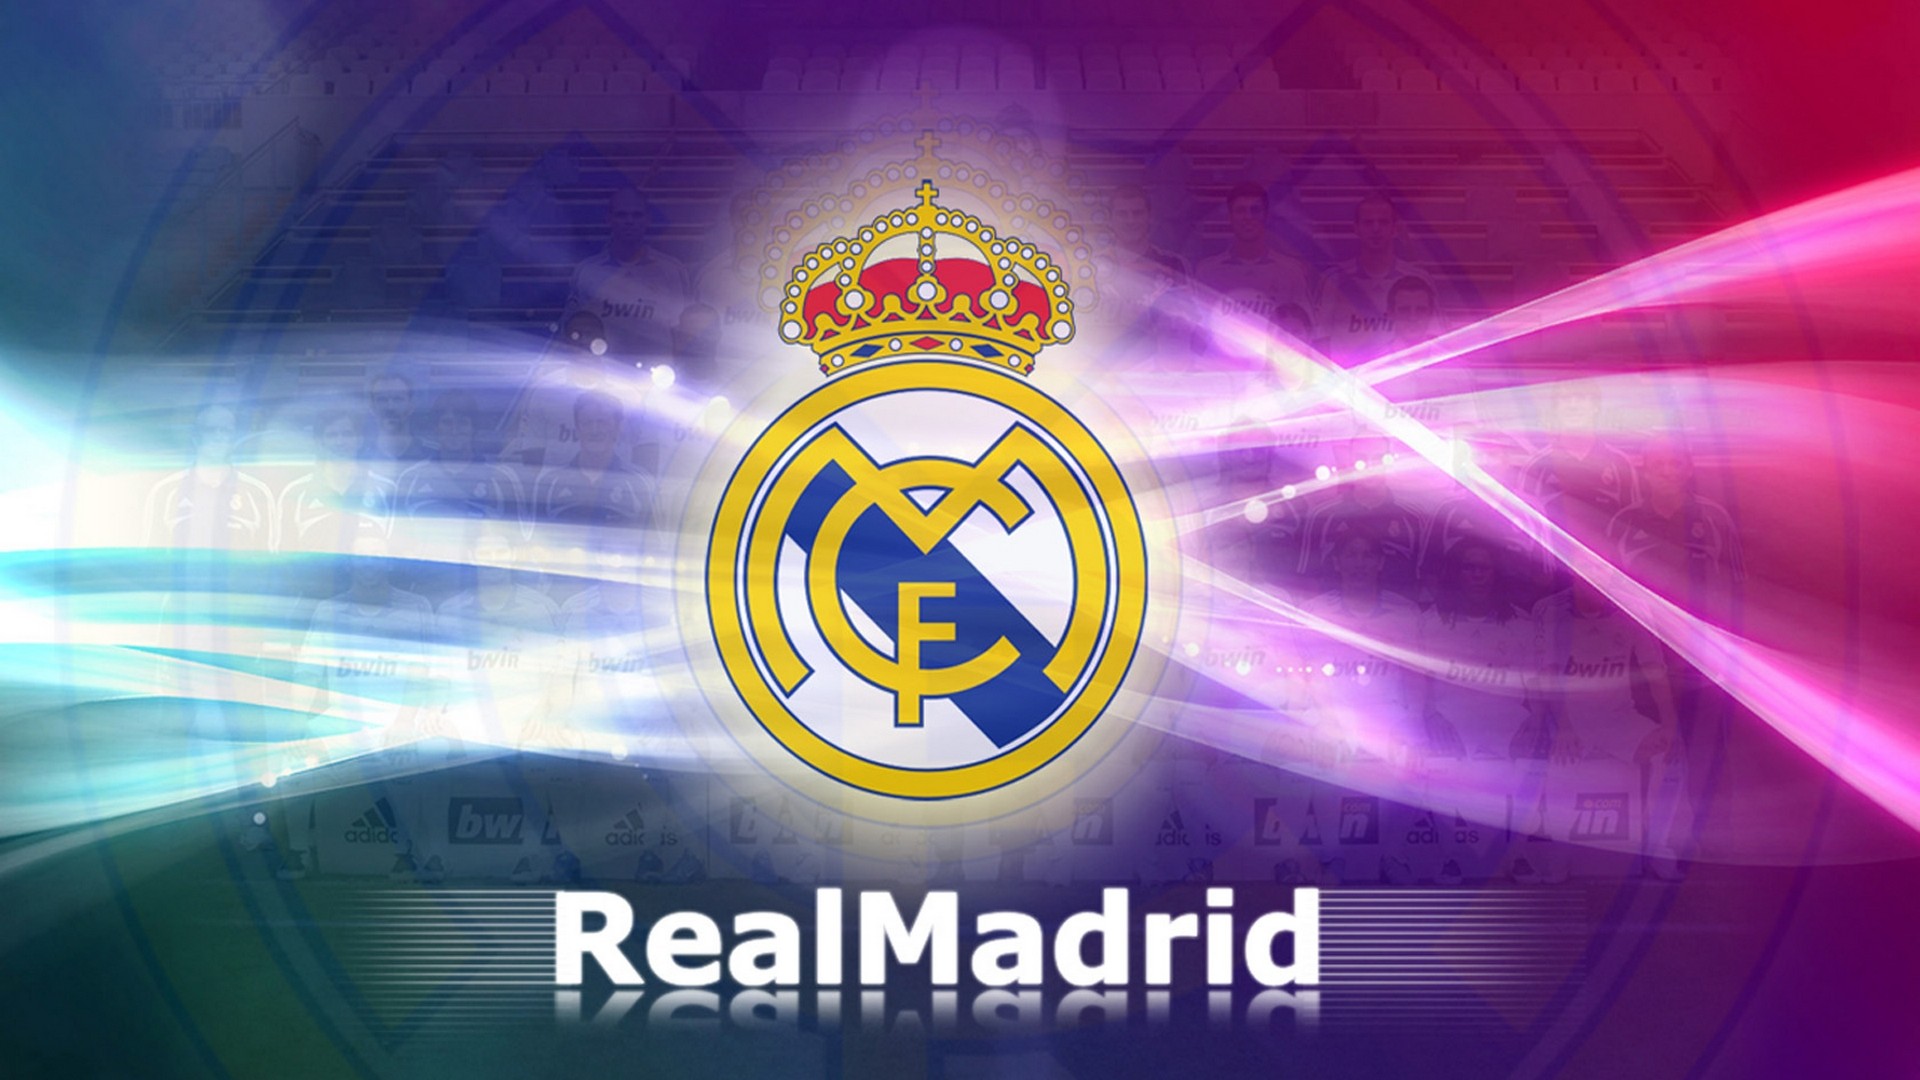 Real Madrid CF Wallpaper For Mac Backgrounds with resolution 1920x1080 pixel. You can make this wallpaper for your Mac or Windows Desktop Background, iPhone, Android or Tablet and another Smartphone device